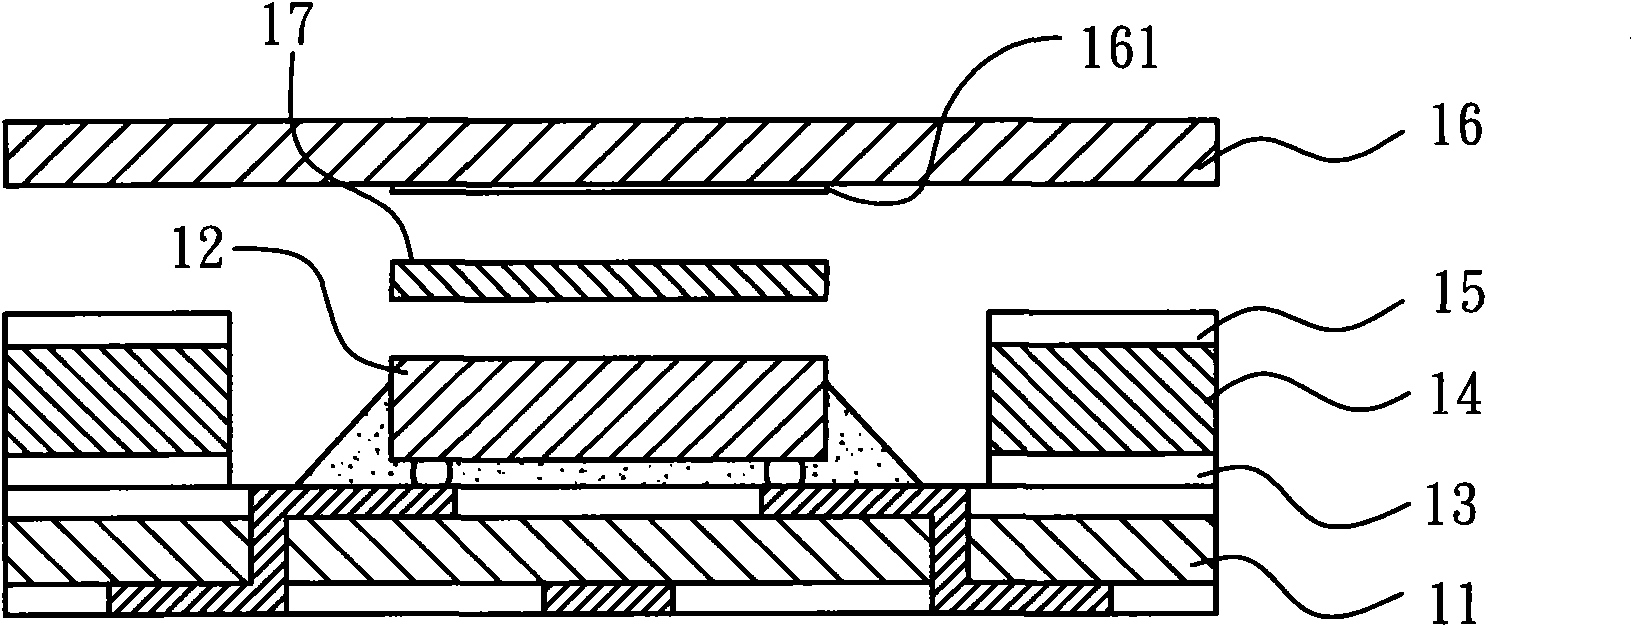 Radiating packaging structure of semiconductor chip